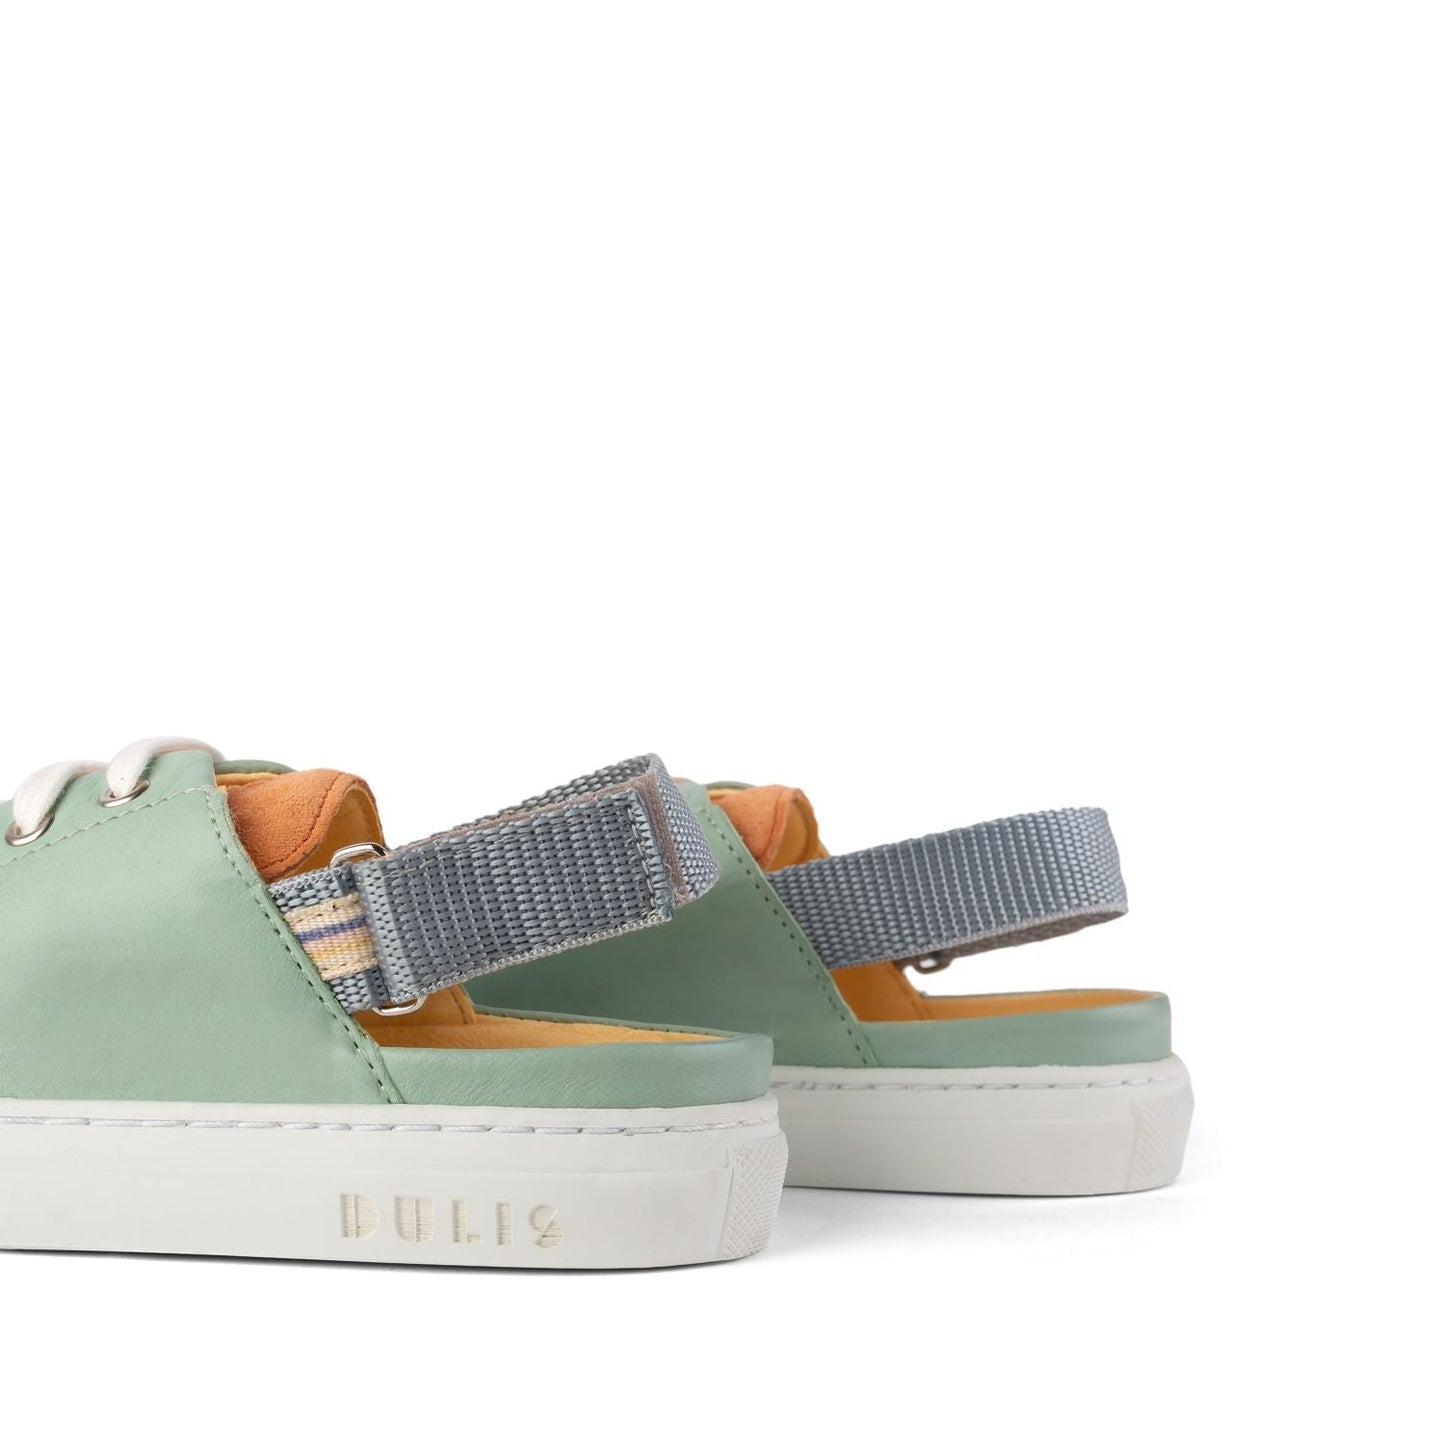 Anis/Peach Hybrid Sneakers Shoes Dulis Shoes 